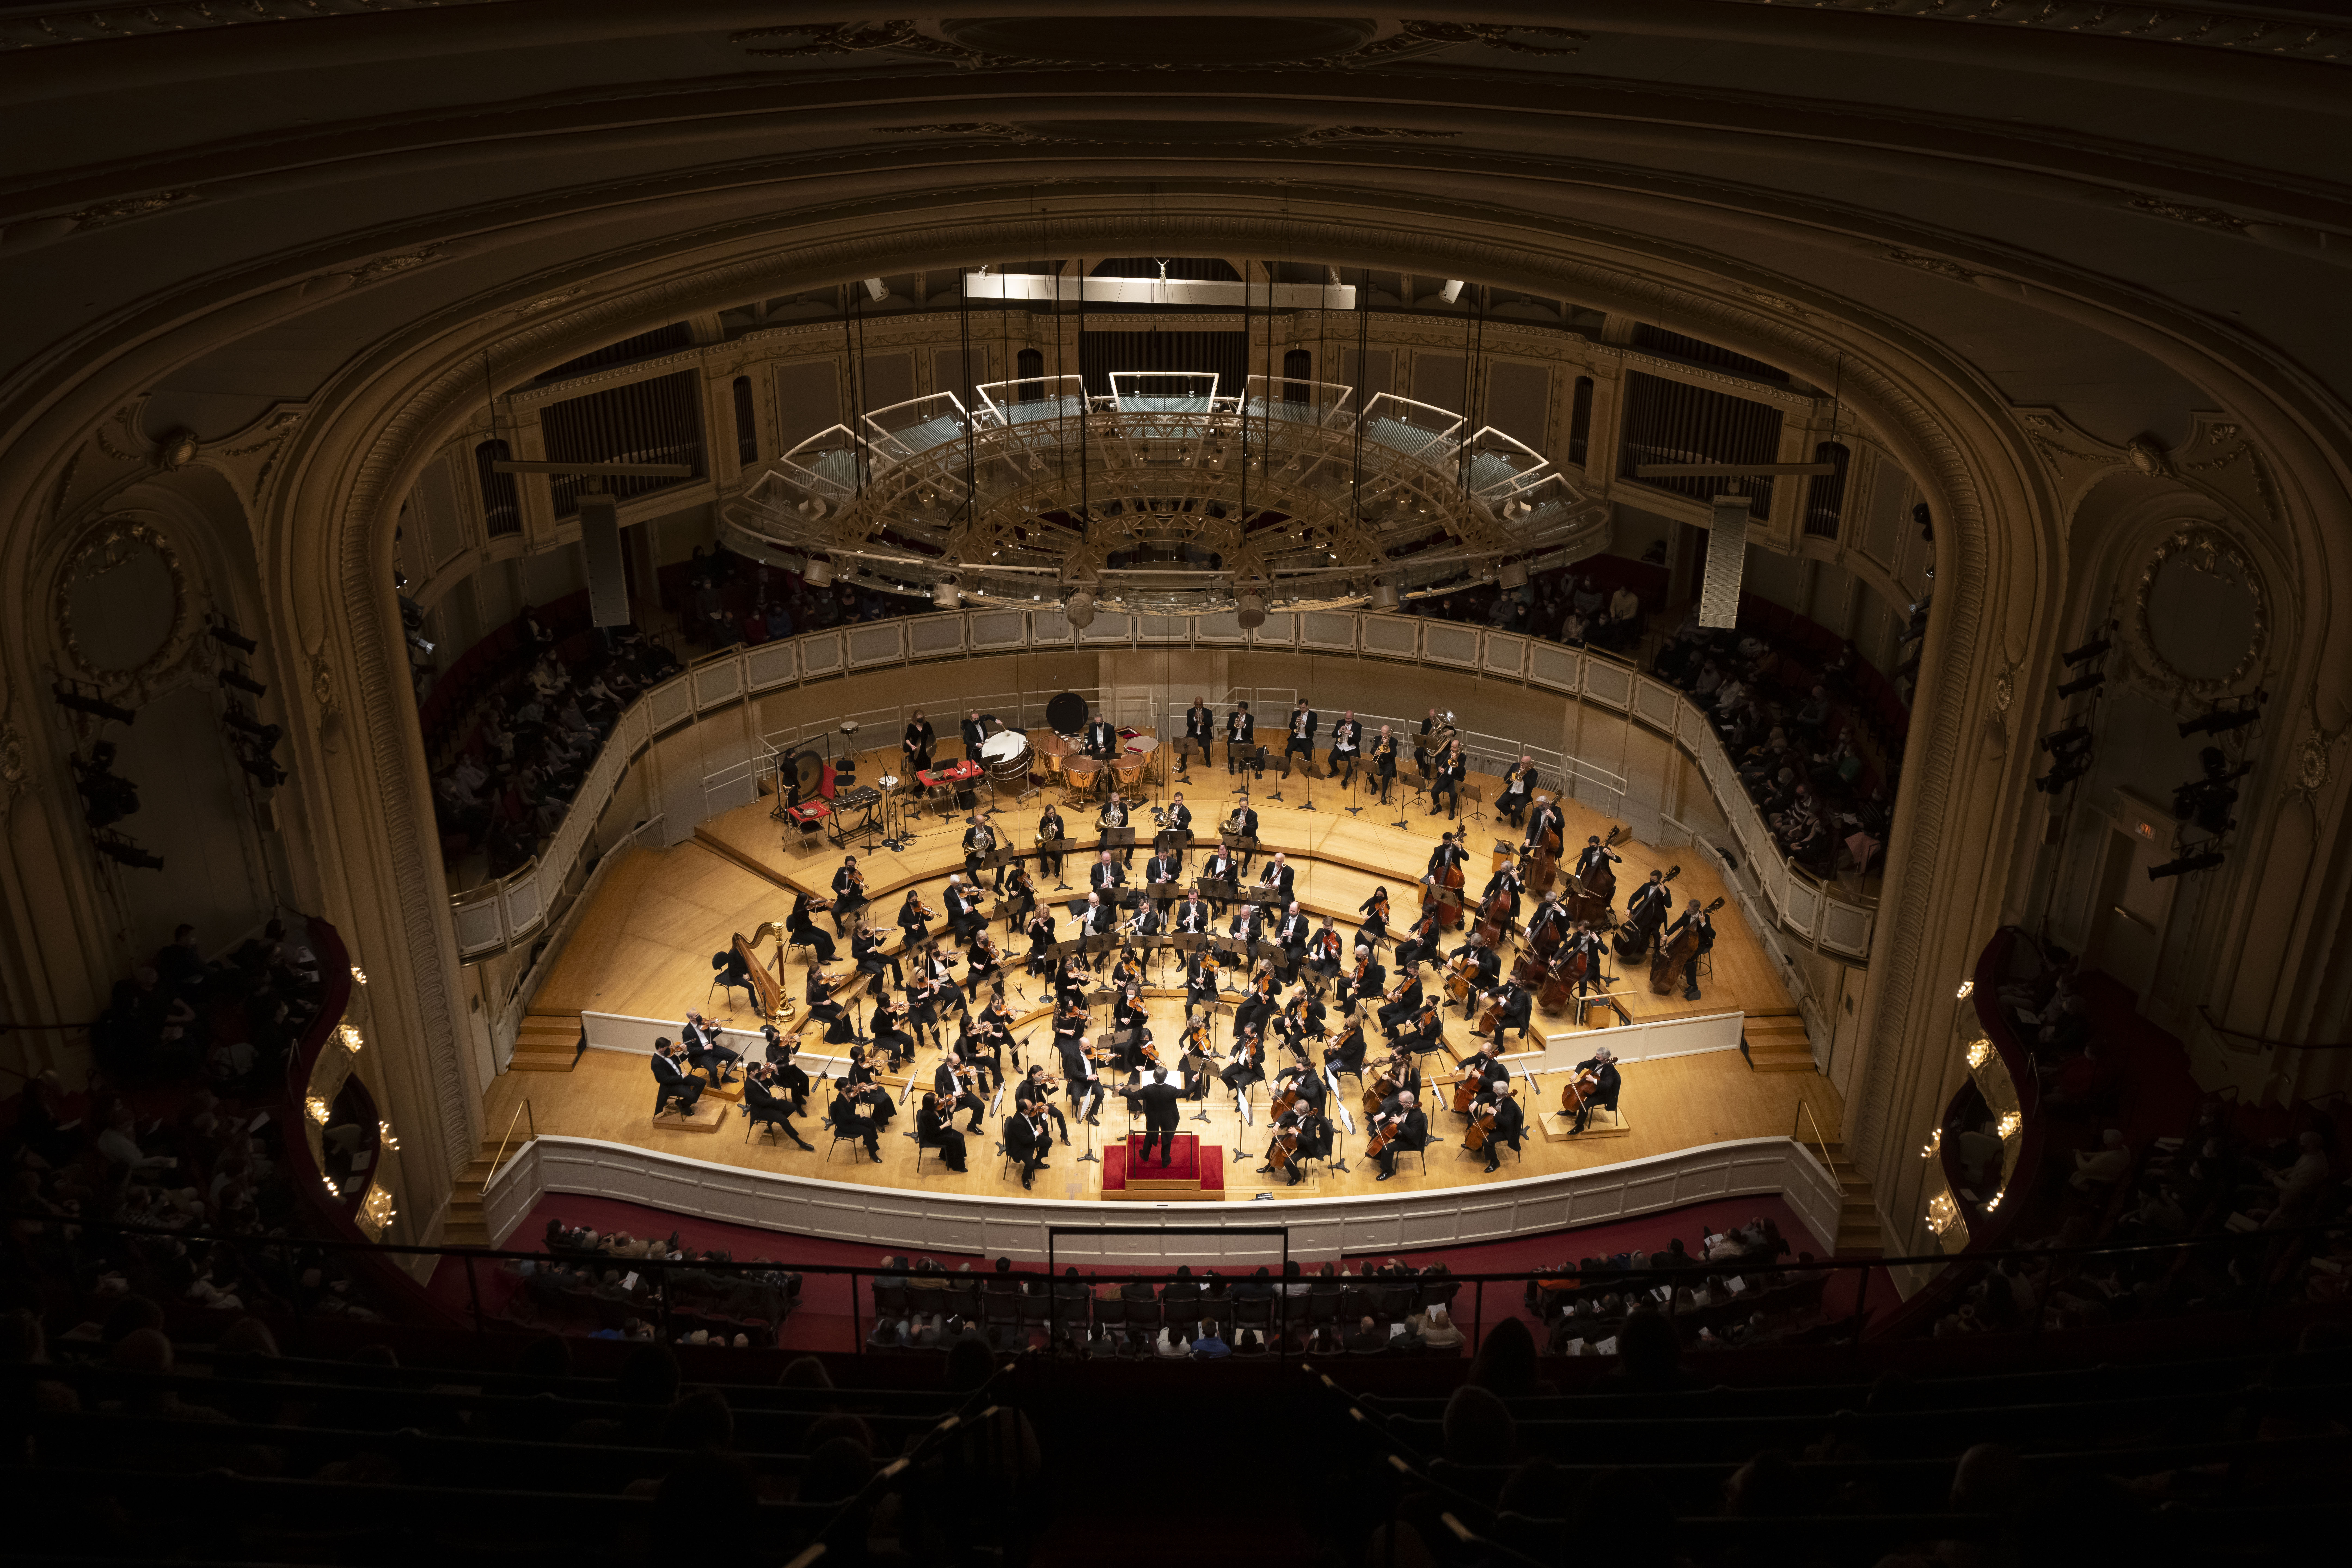 Riccardo Muti leads the Chicago Symphony Orchestra in a program featuring Tchaikovsky’s Suite from “Swan Lake” on Thursday night at Orchestra Hall.